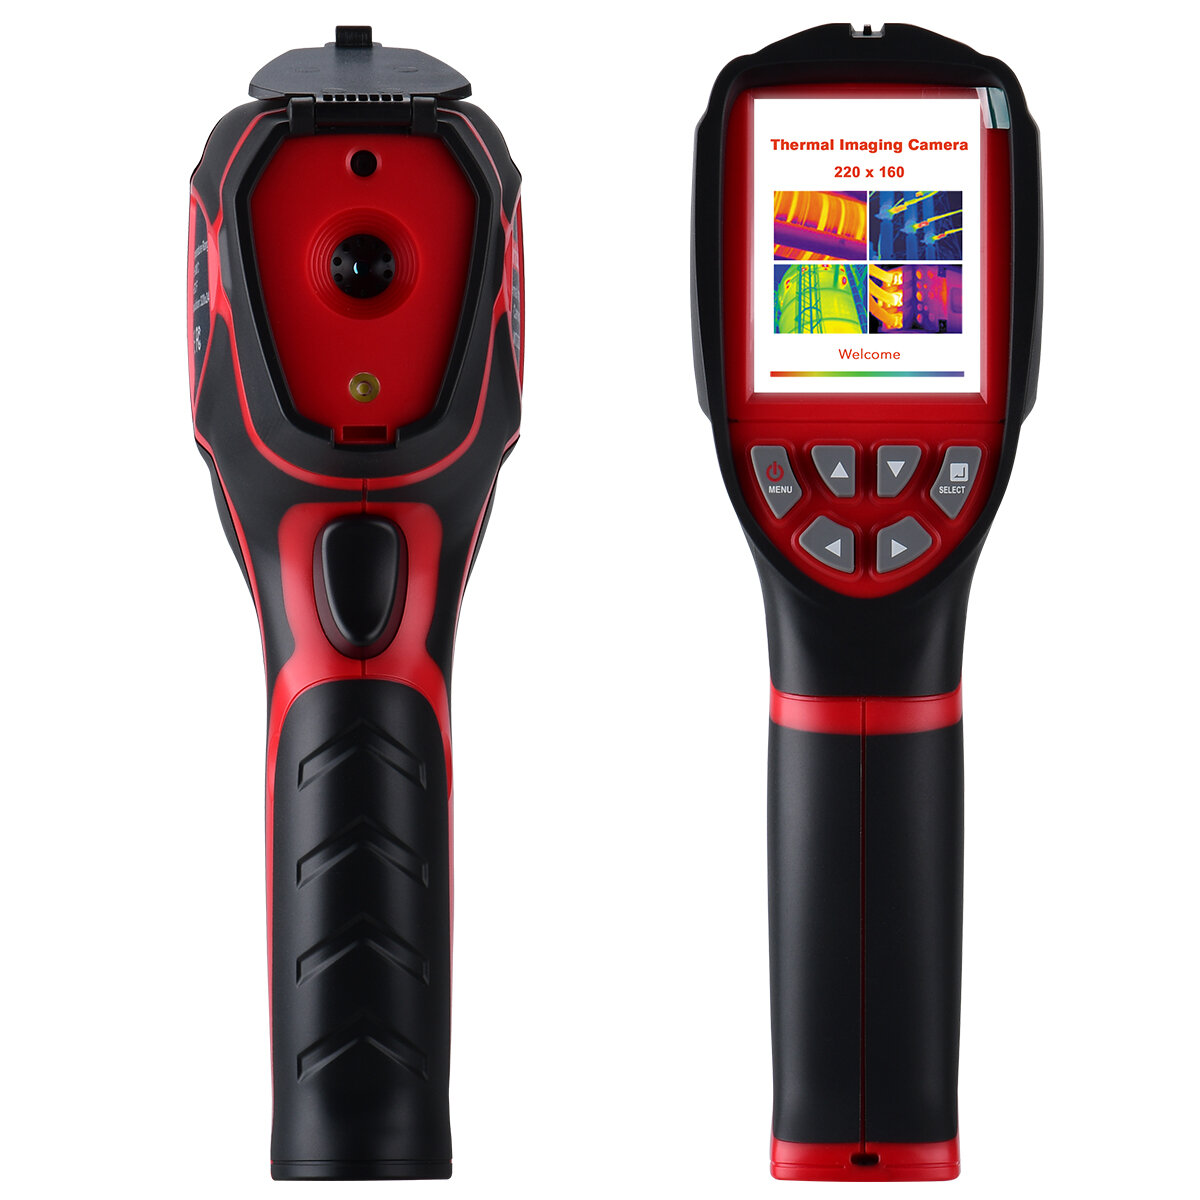 best price,wt3220,thermal,imager,220x160,discount